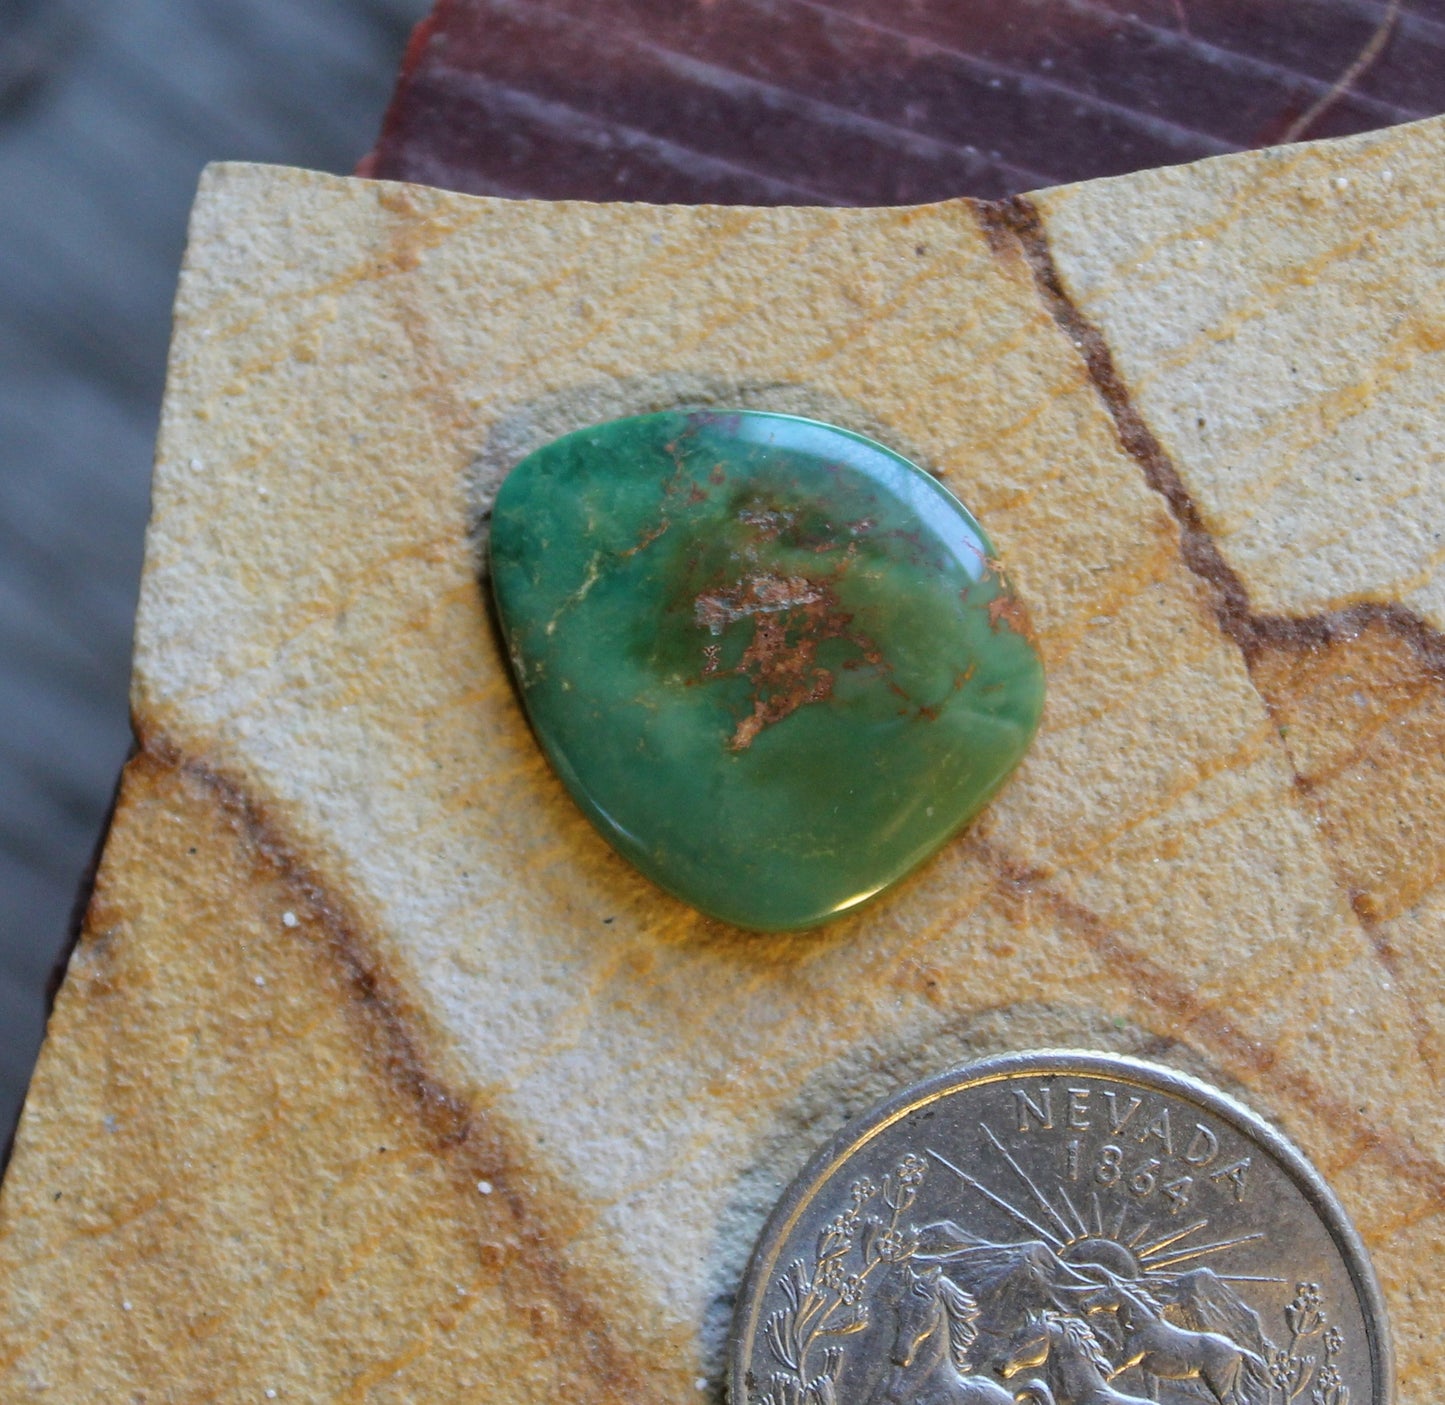 9 green Stone Mountain Turquoise cabochon with red matrix